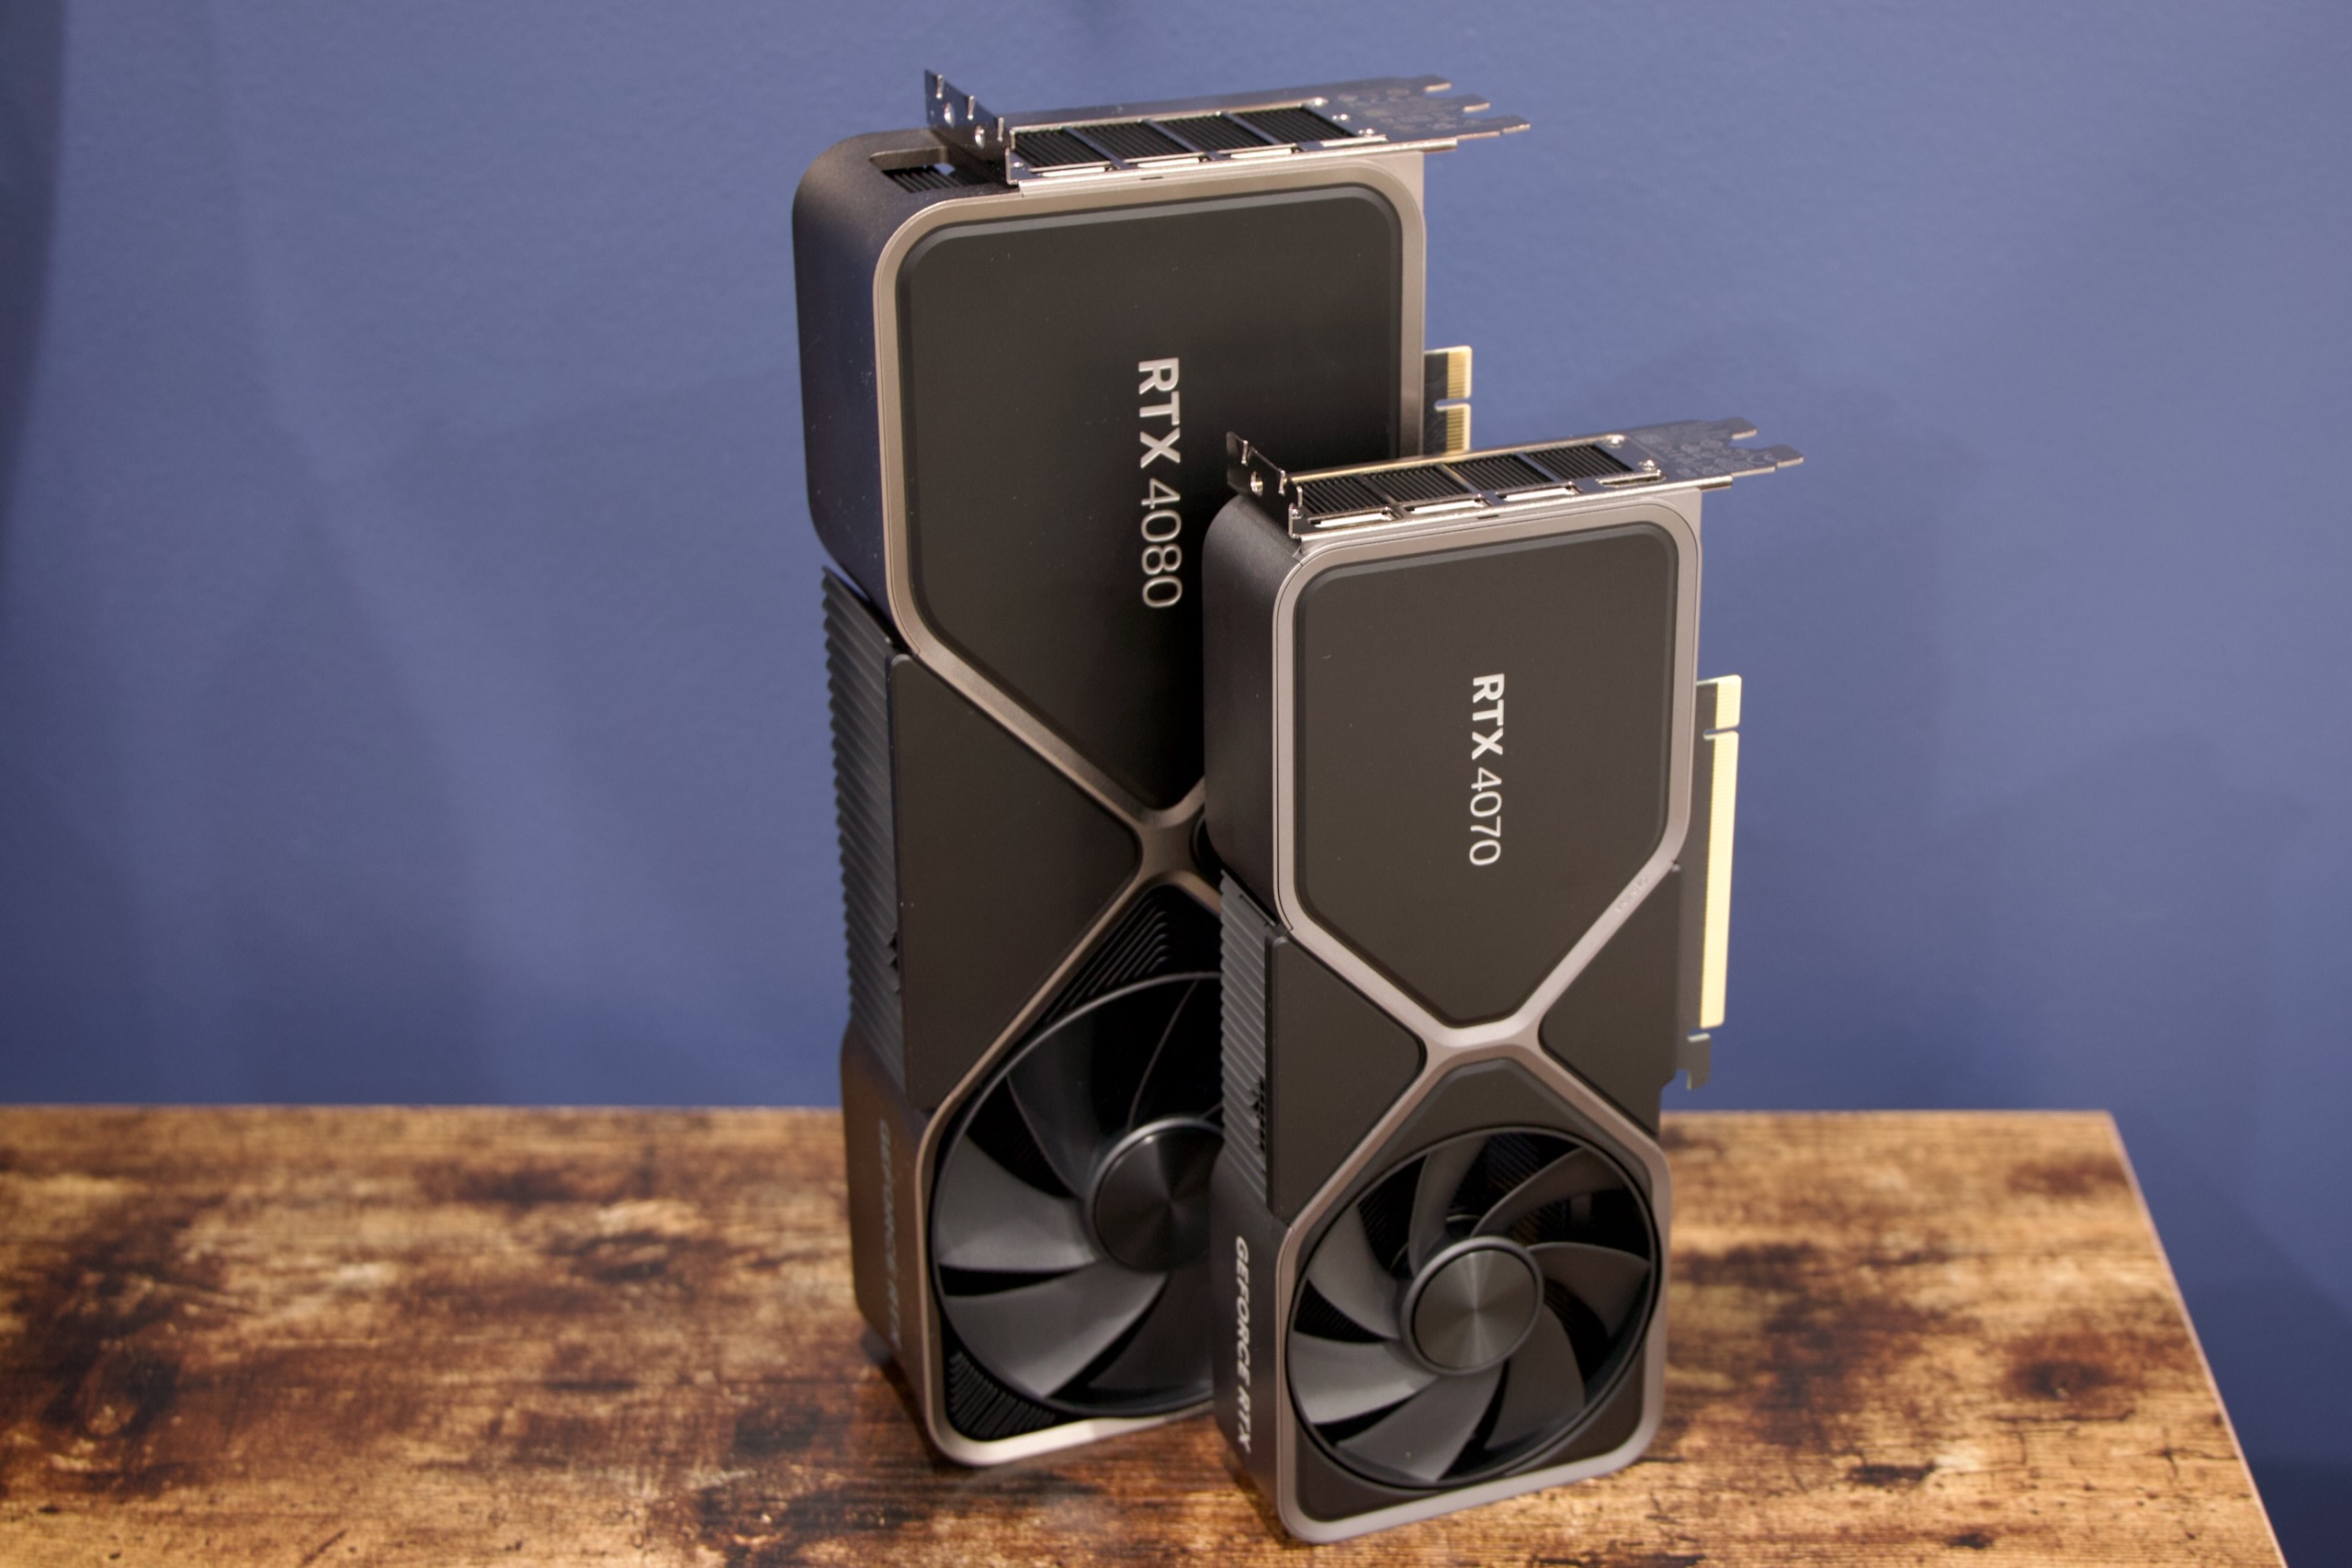 RTX 4070 review: An ideal GPU for anyone who skipped the graphics